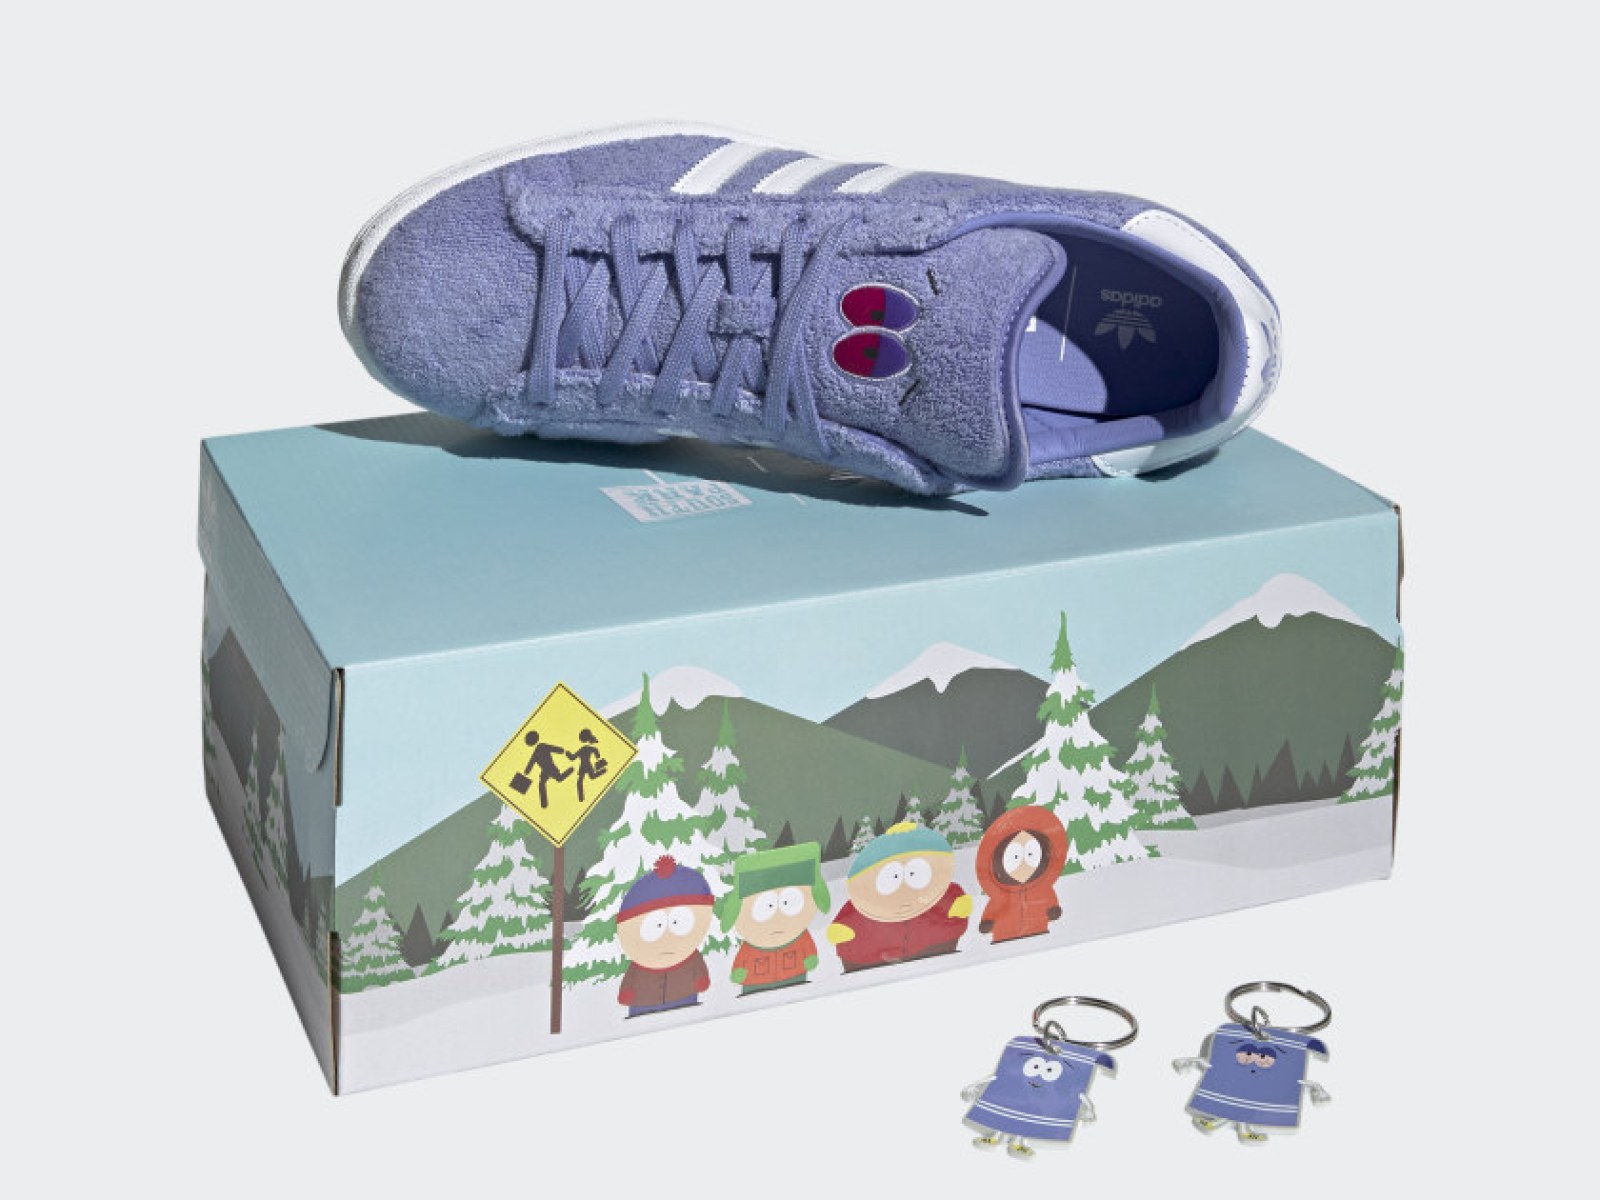 Adidas x South Park Shoes Selling for Hundreds on eBay and StockX